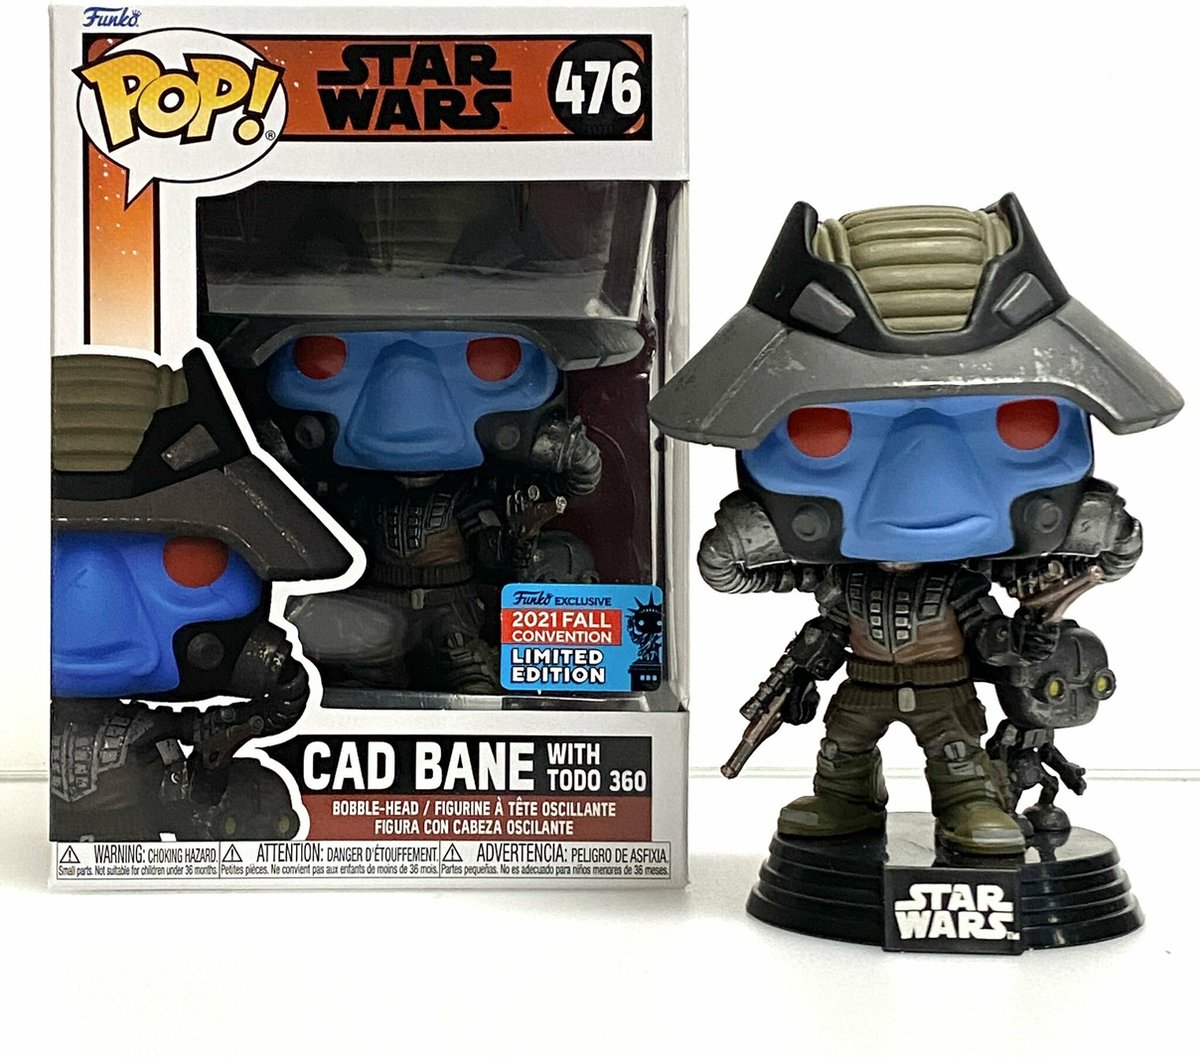   POP Star Wars 476 Cad Bane with Todo 360 2021 Fall Convention